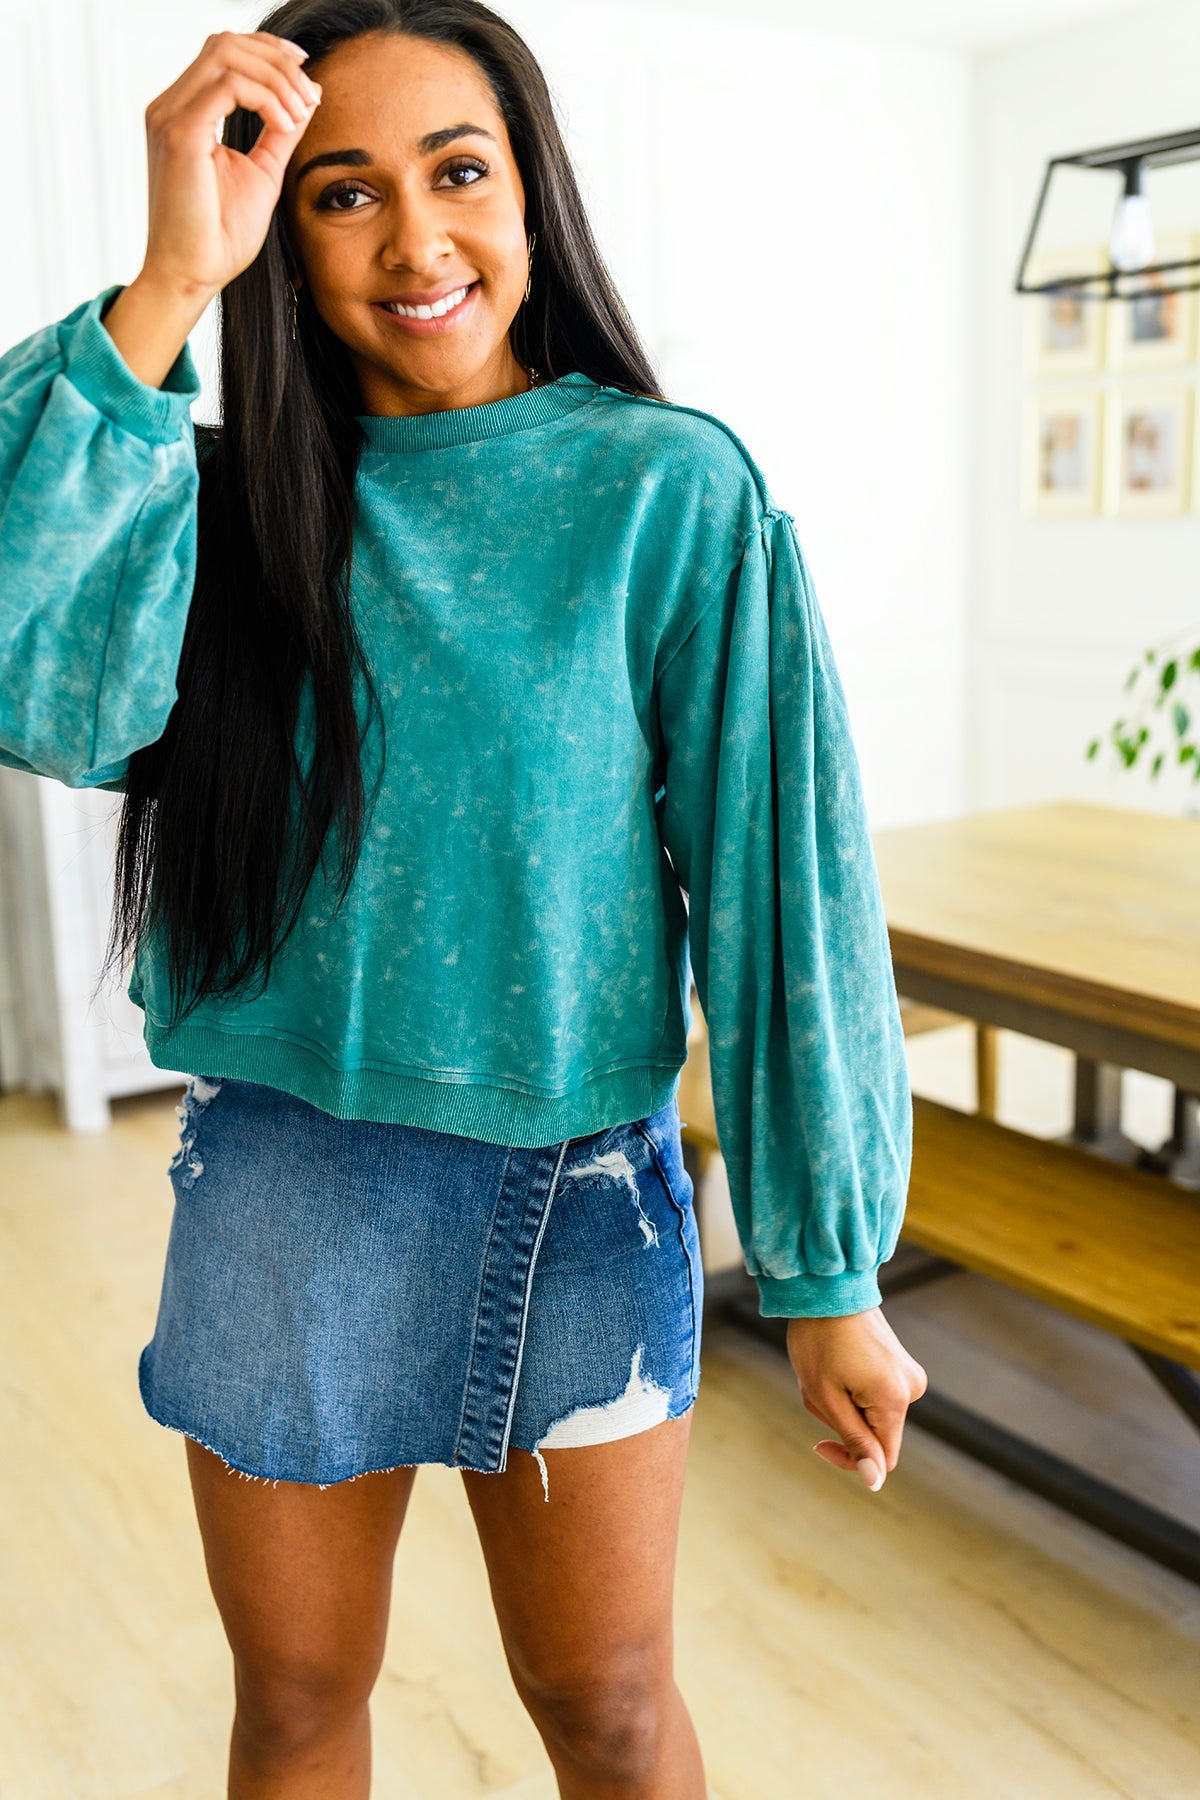 Mineral Wash Sweater in Teal